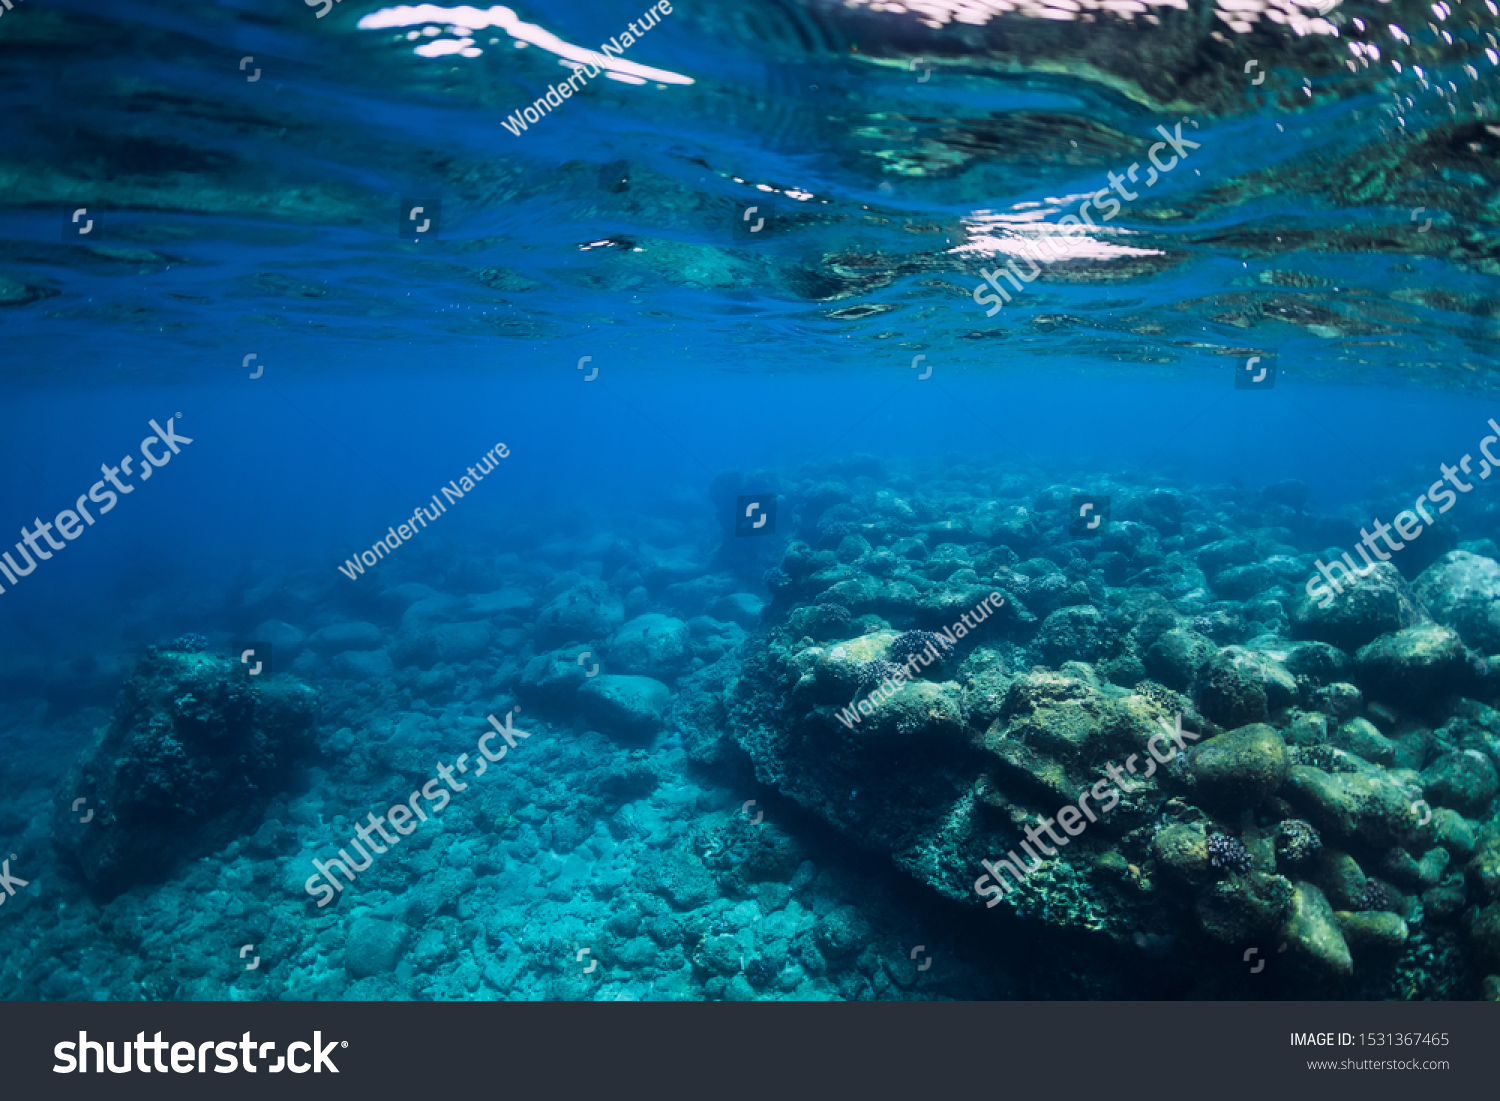 Tranquil underwater scene with copy space. Tropical transparent ocean #1531367465